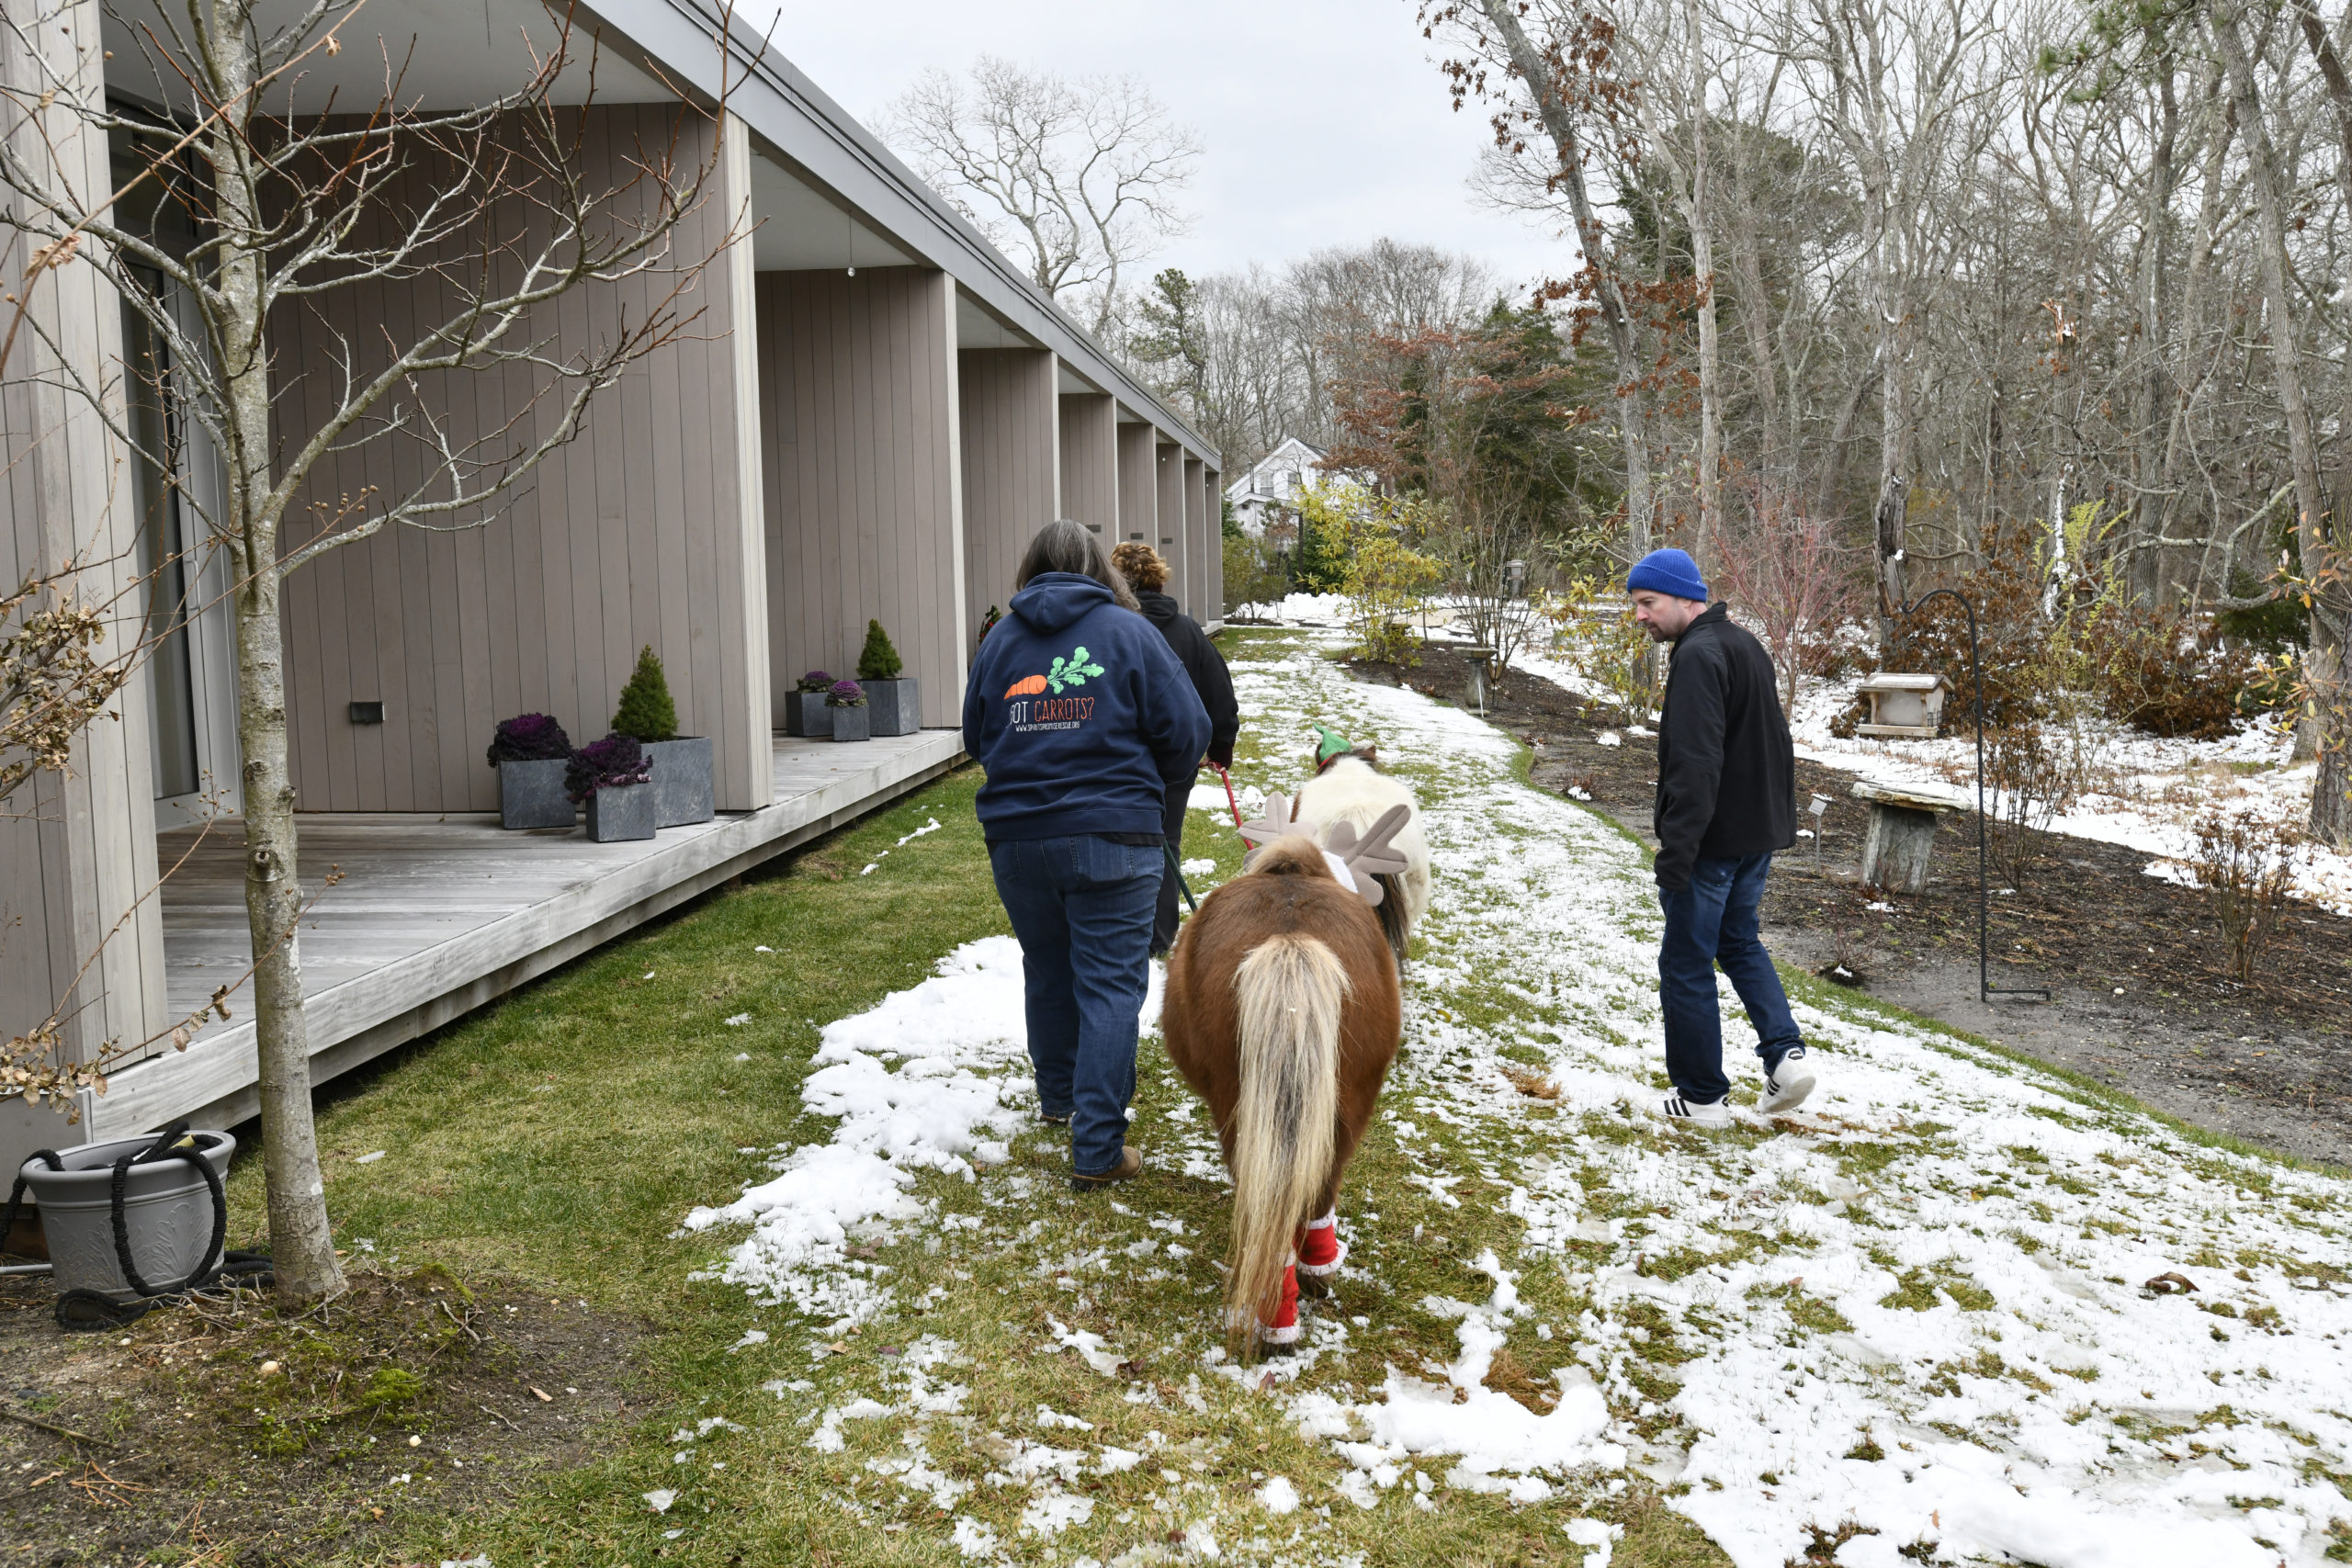 Mini horses Sweetie and Christmas from Spirit’s Promise Equine Rescue and Rehabilitation Program in Riverhead paid a visit to Daniel Byrne at the East End Hospice Kanas Center for Hospice Care in Westhampton Beach last week. DANA SHAW